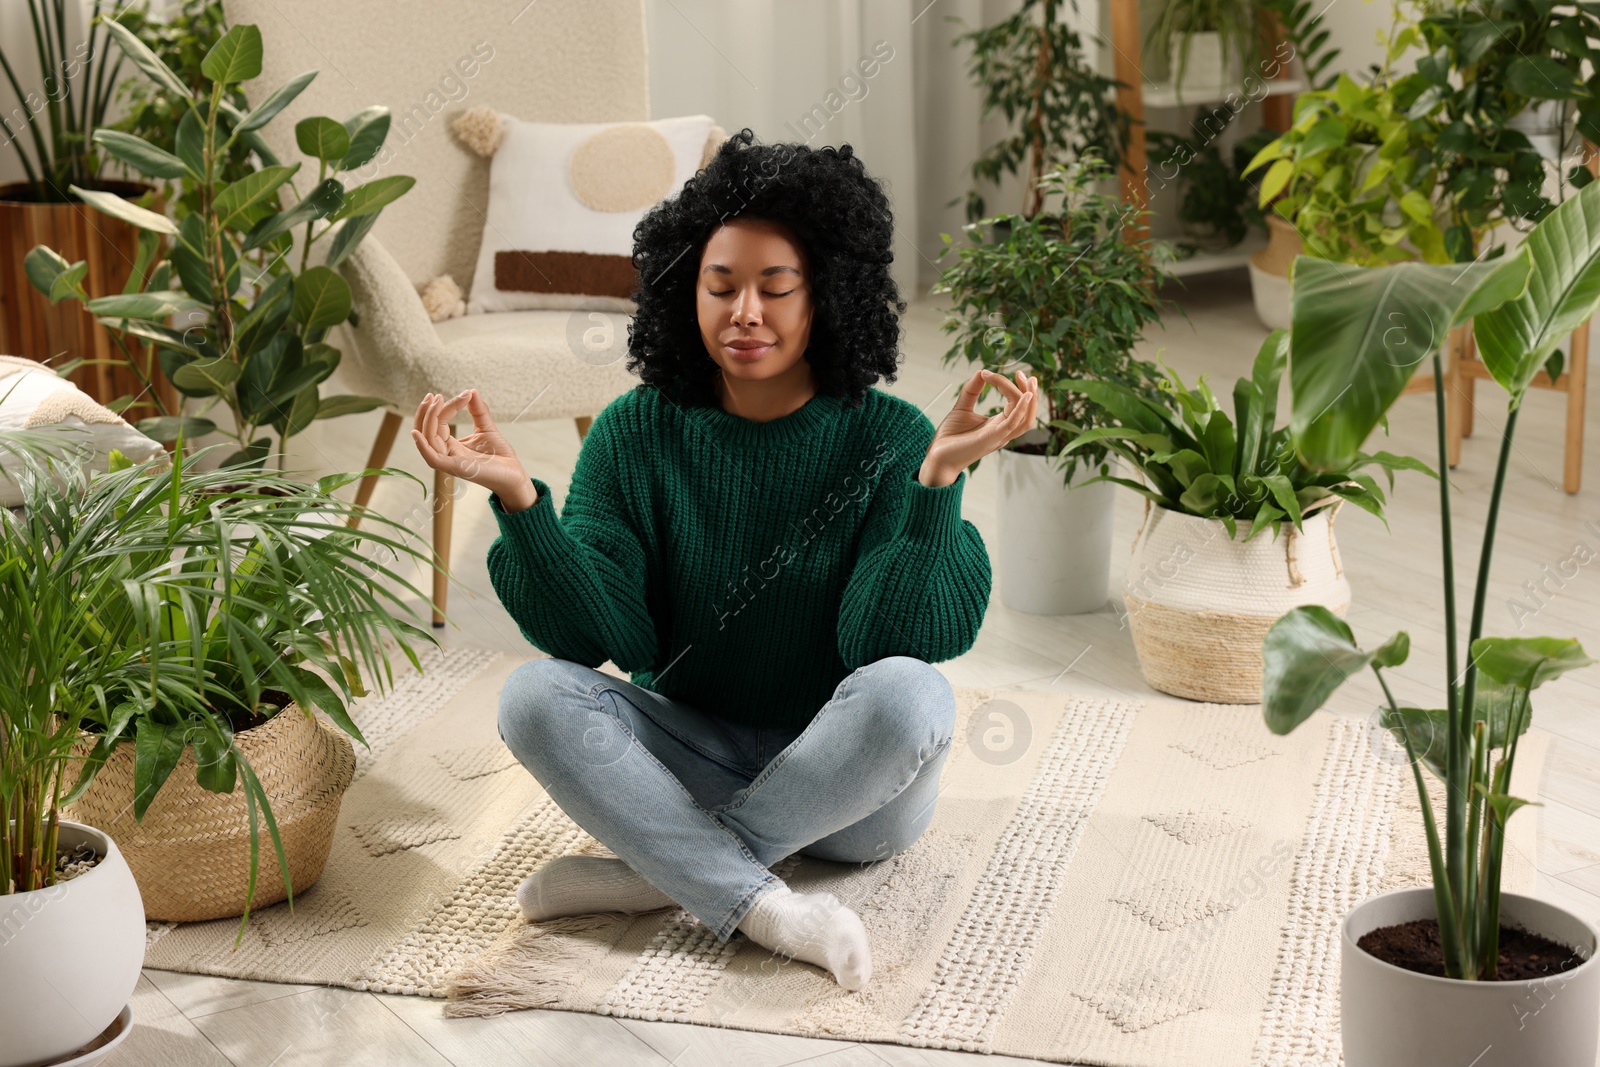 Photo of Relaxing atmosphere. Woman meditating near potted houseplants in room